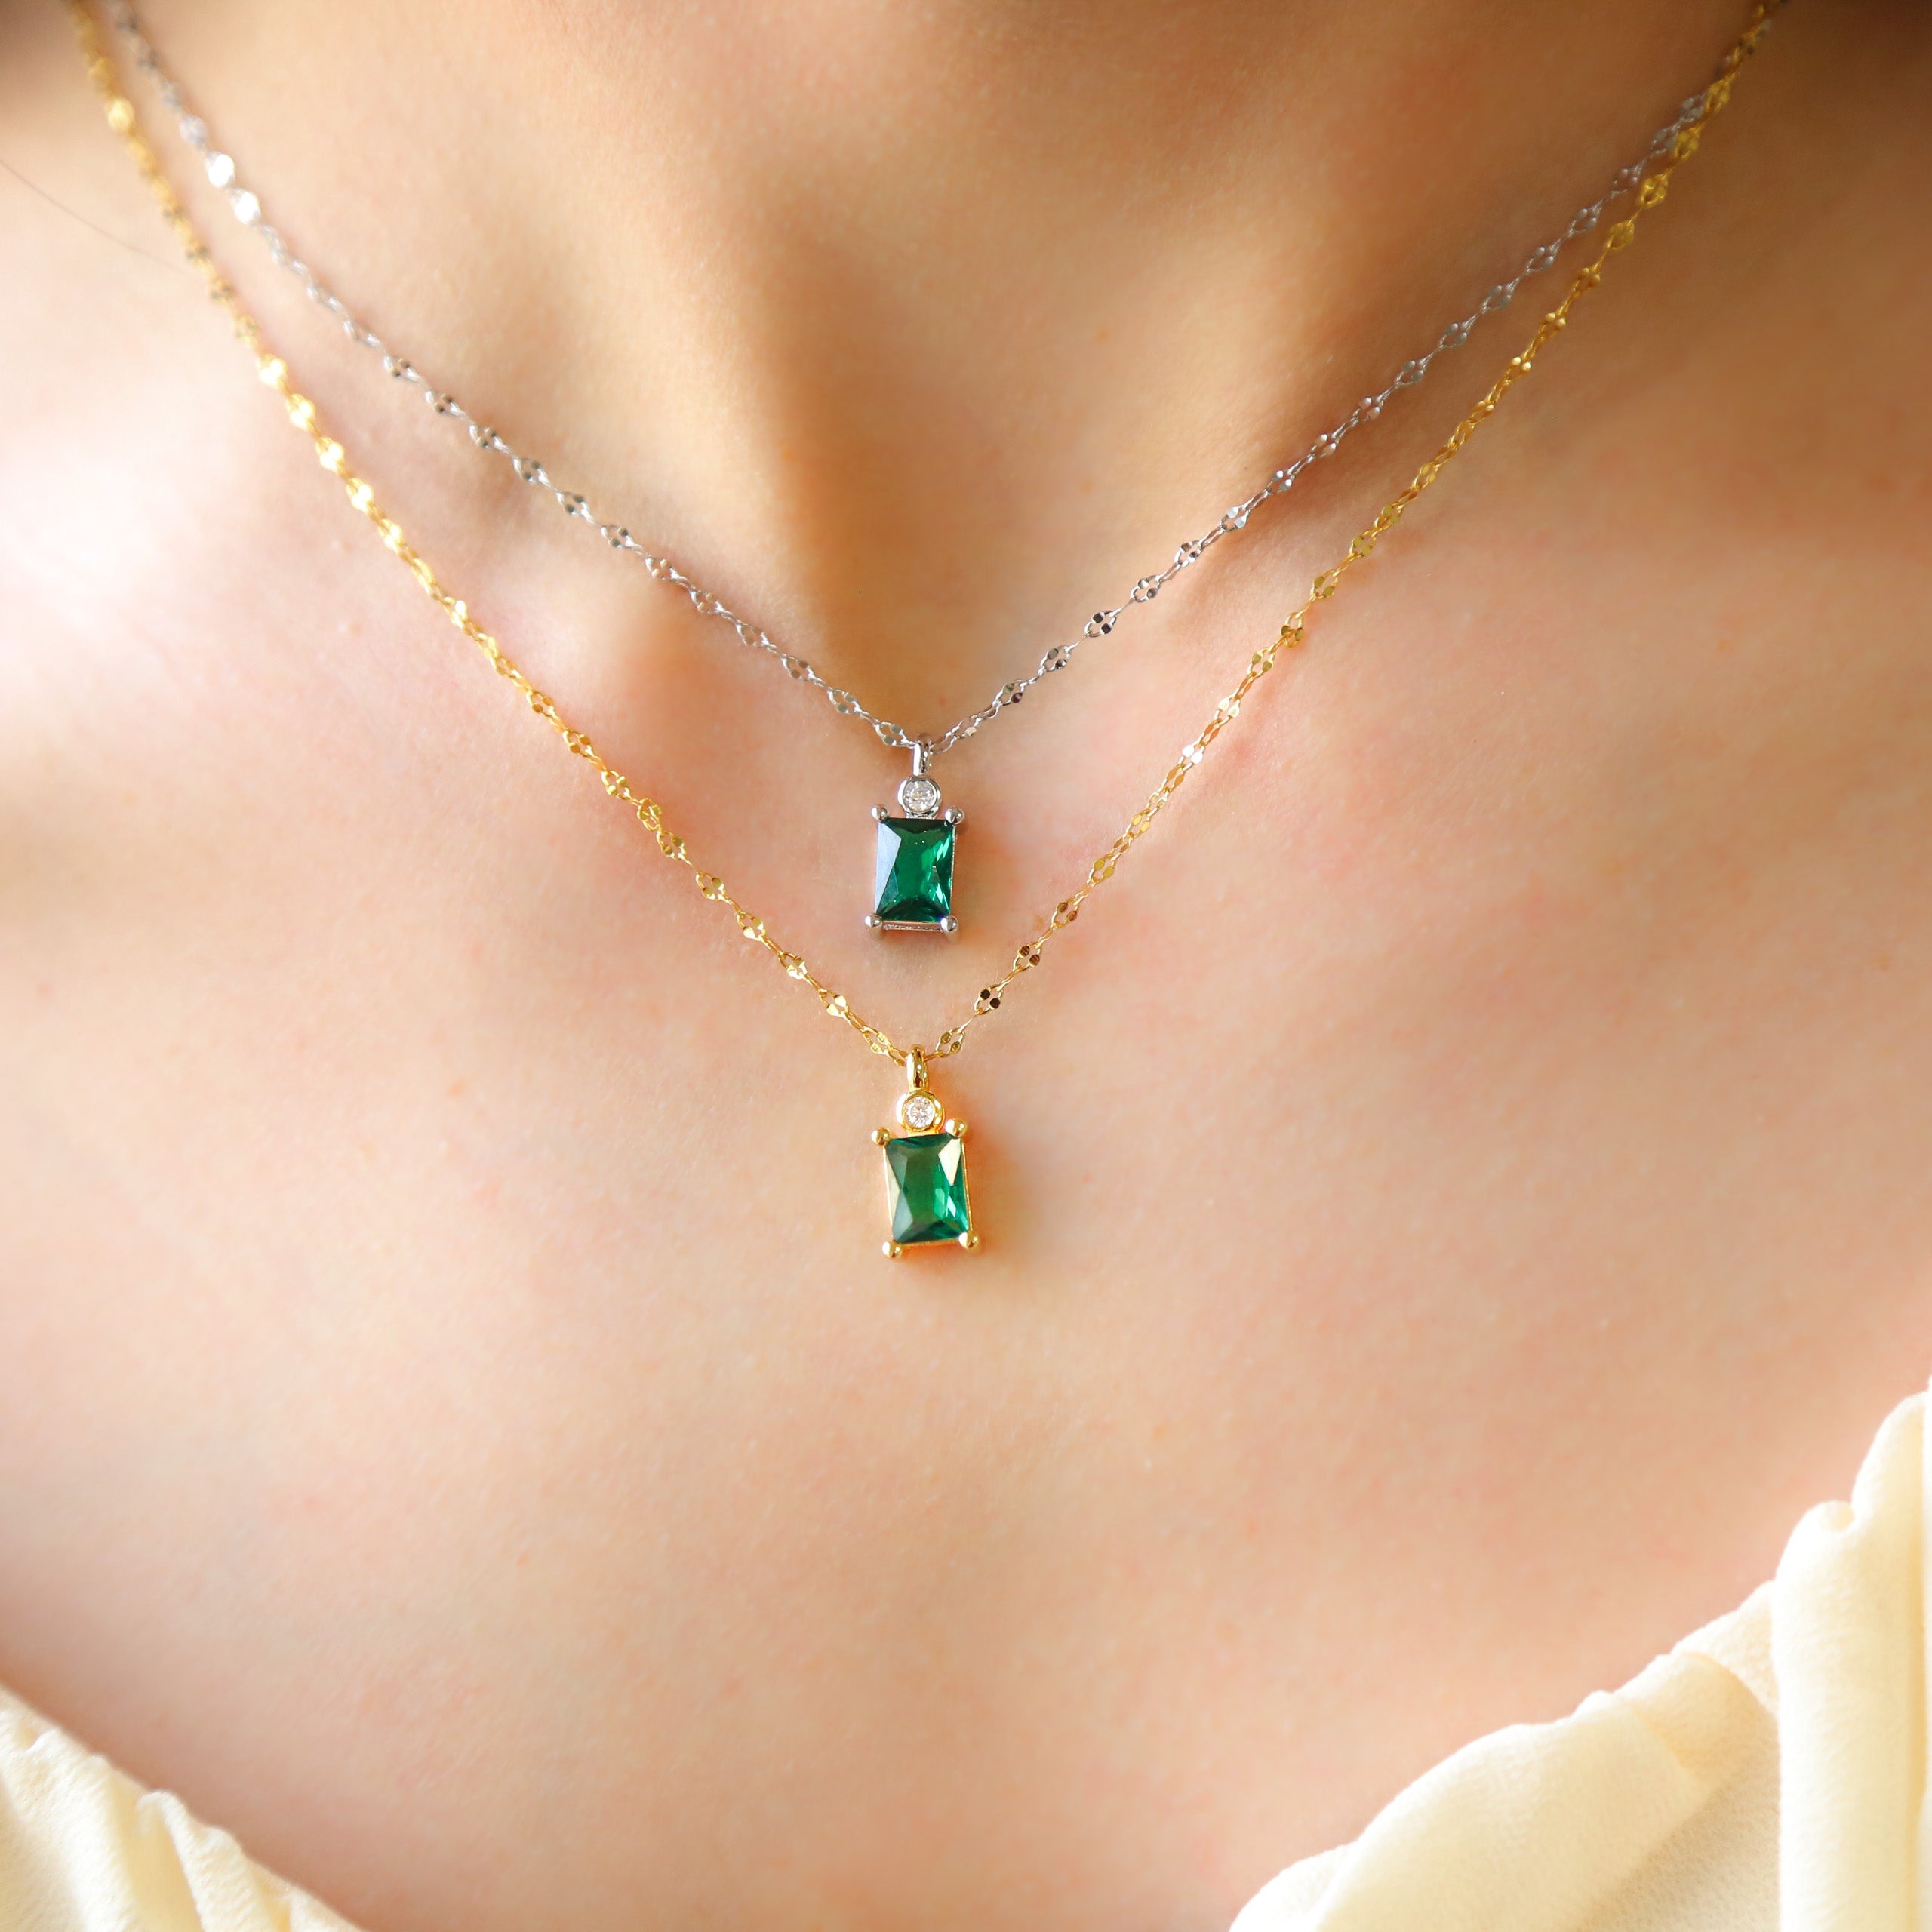 EMERALD SKY - Emerald CZ Necklace in Sterling Silver or 18K Gold